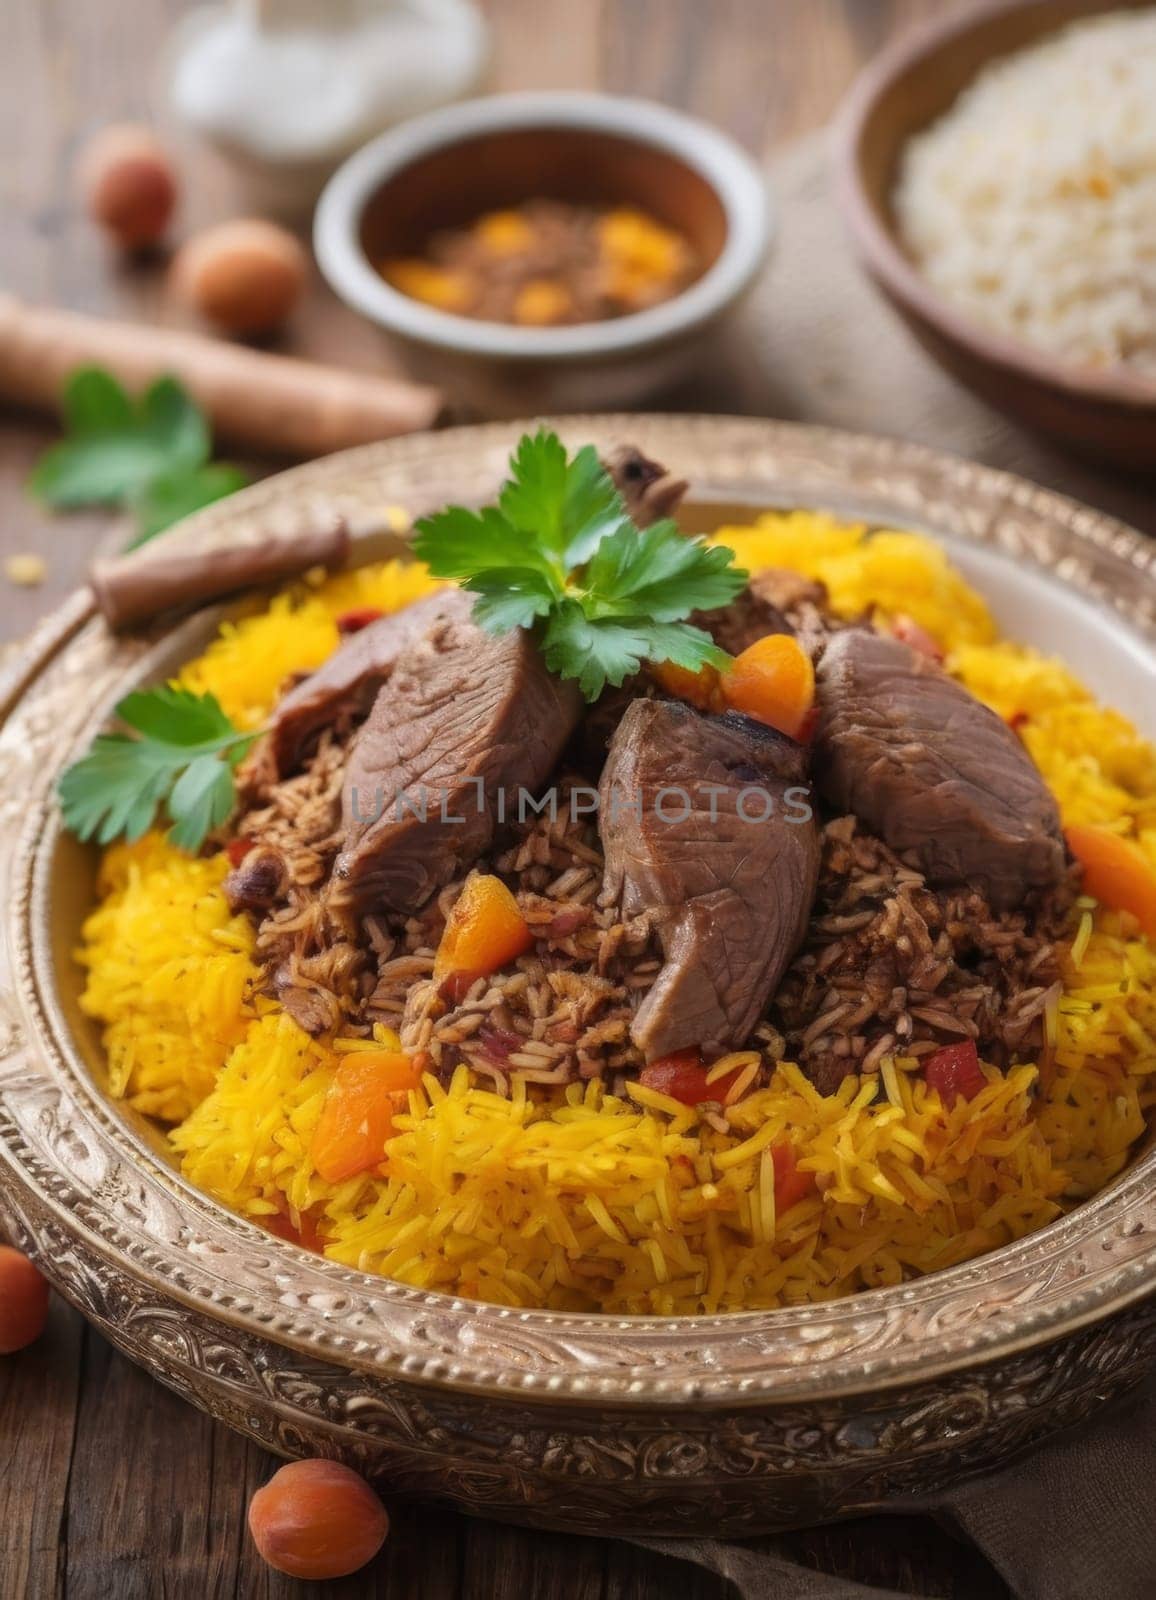 Authentic Azerbaijani plov, a traditional rice pilaf dish featuring fragrant saffron-infused rice, tender lamb, and sweet apricots, elegantly presented in an ornate serving dish. by sfinks